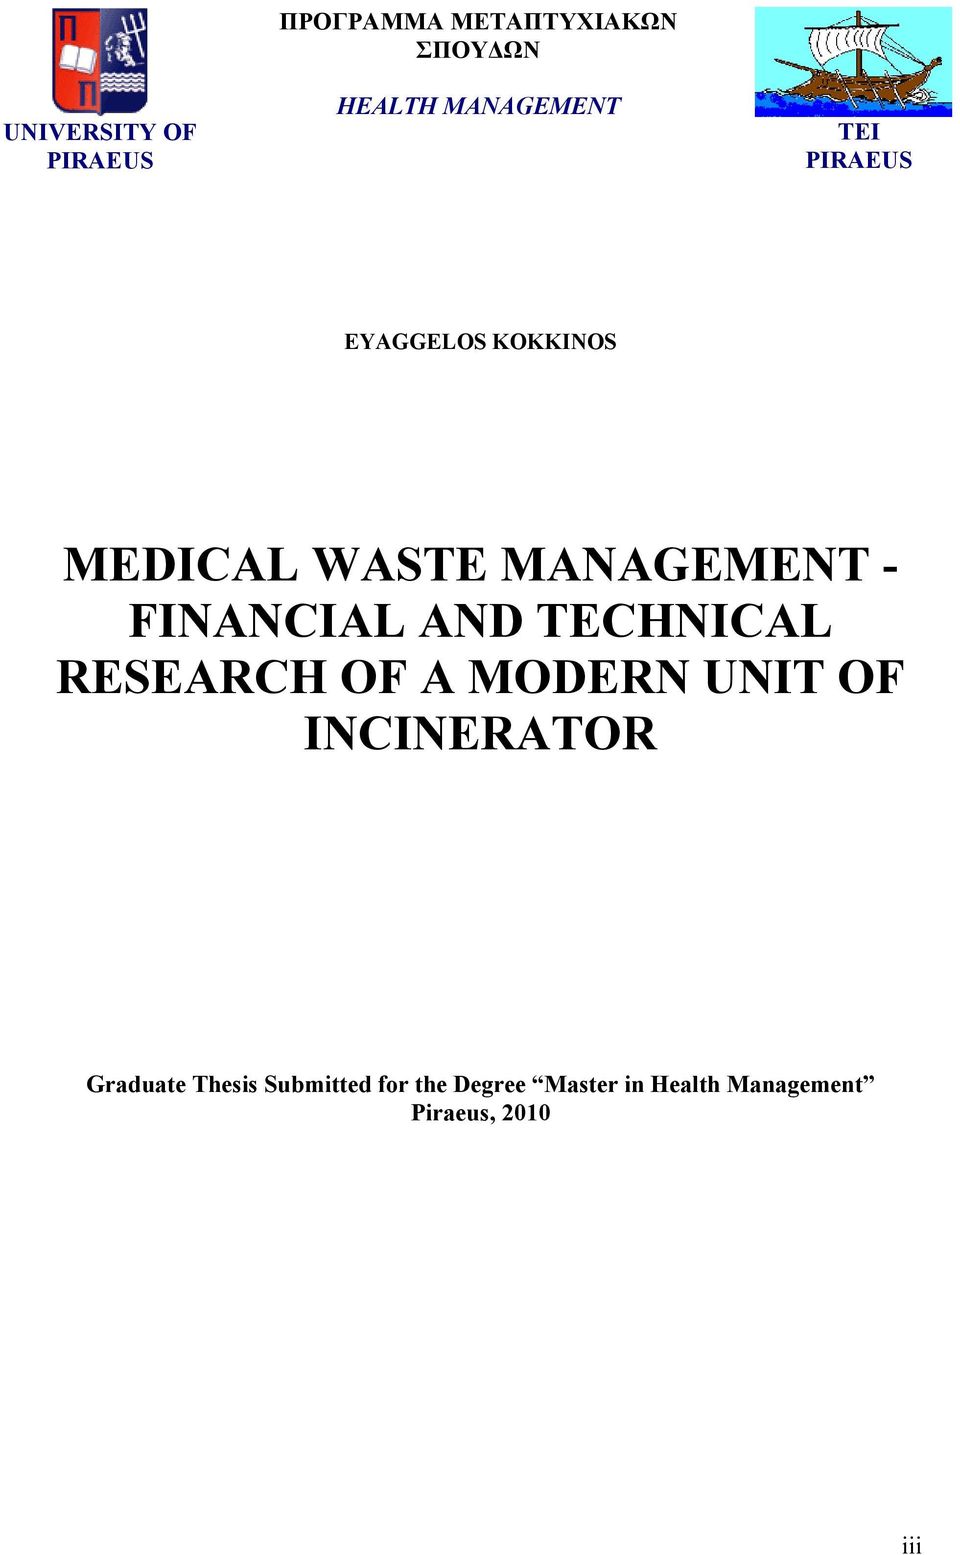 FINANCIAL AND TECHNICAL RESEARCH OF A MODERN UNIT OF INCINERATOR